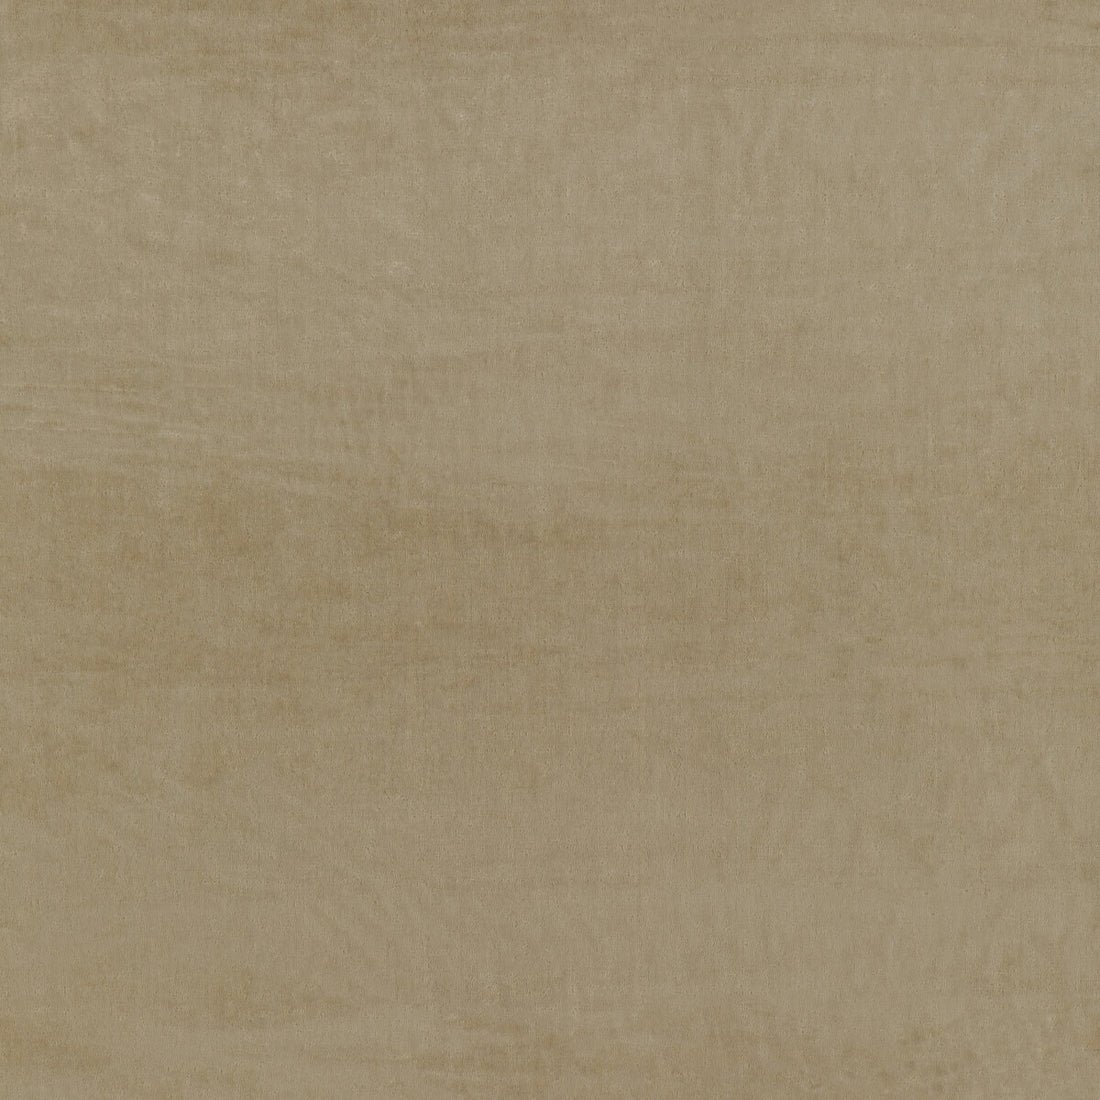 Fine Lines fabric in latte color - pattern 34330.116.0 - by Kravet Couture